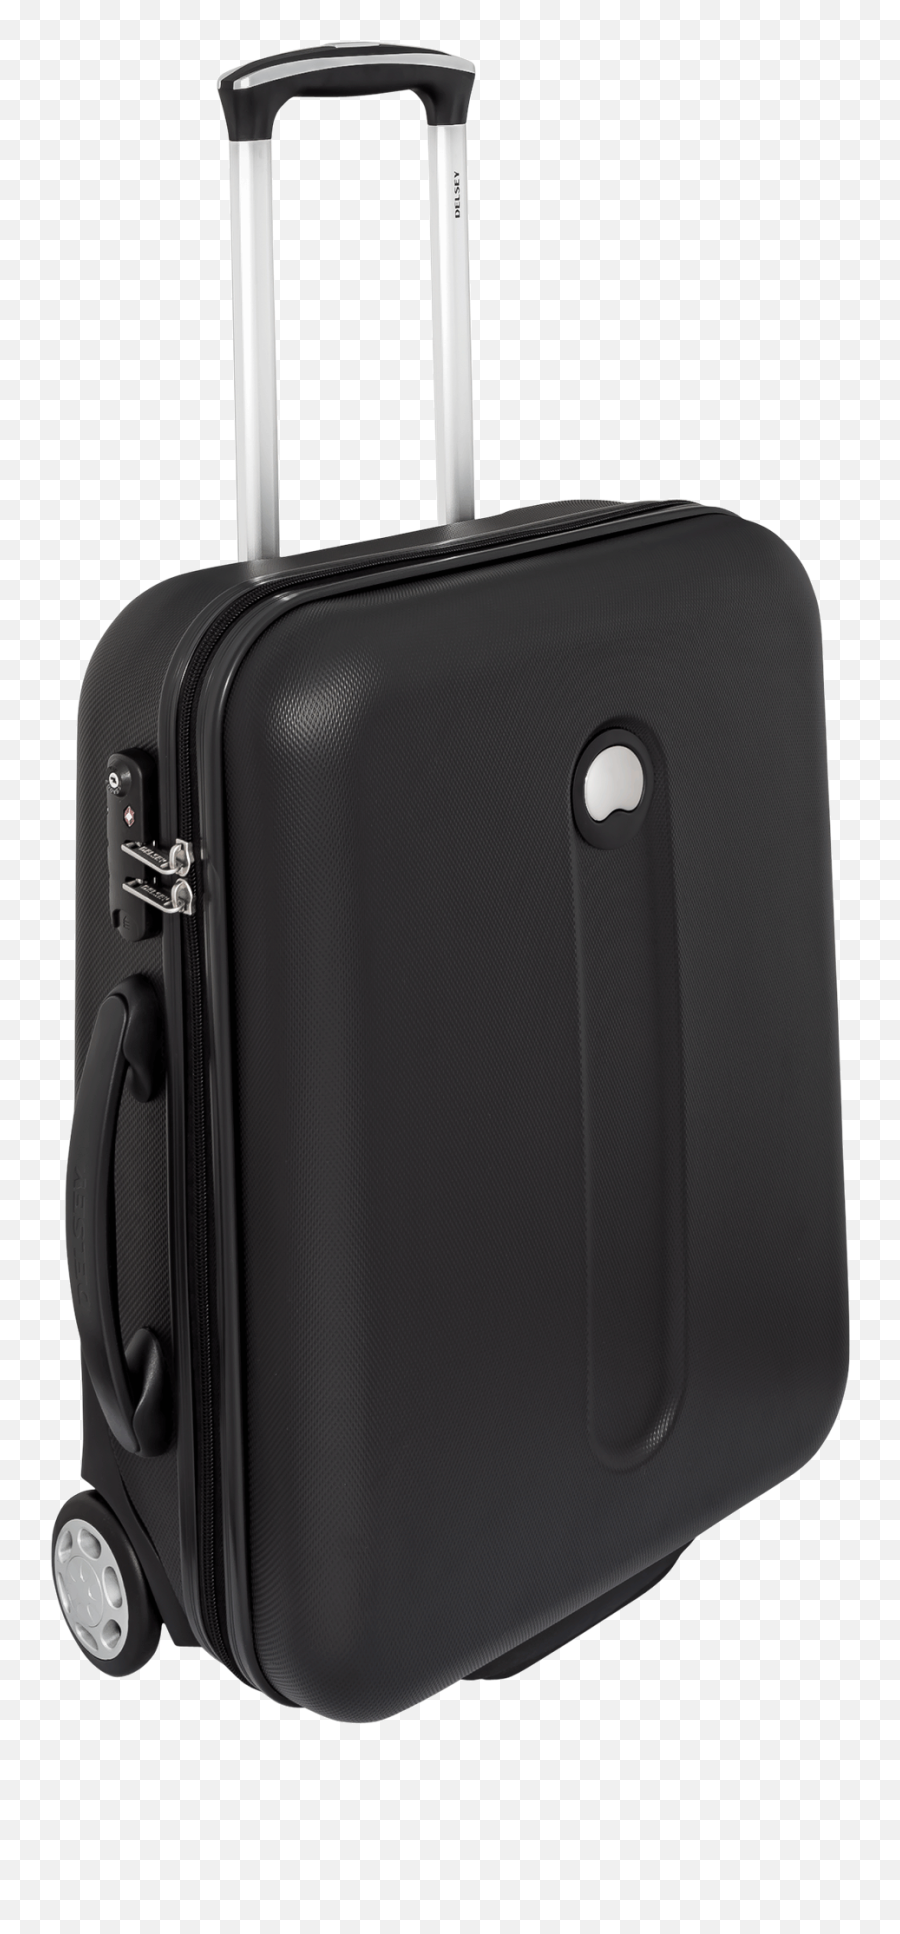 Black Luggage Png Image For Free Download - Transparent Luggage Png,Luggage Png